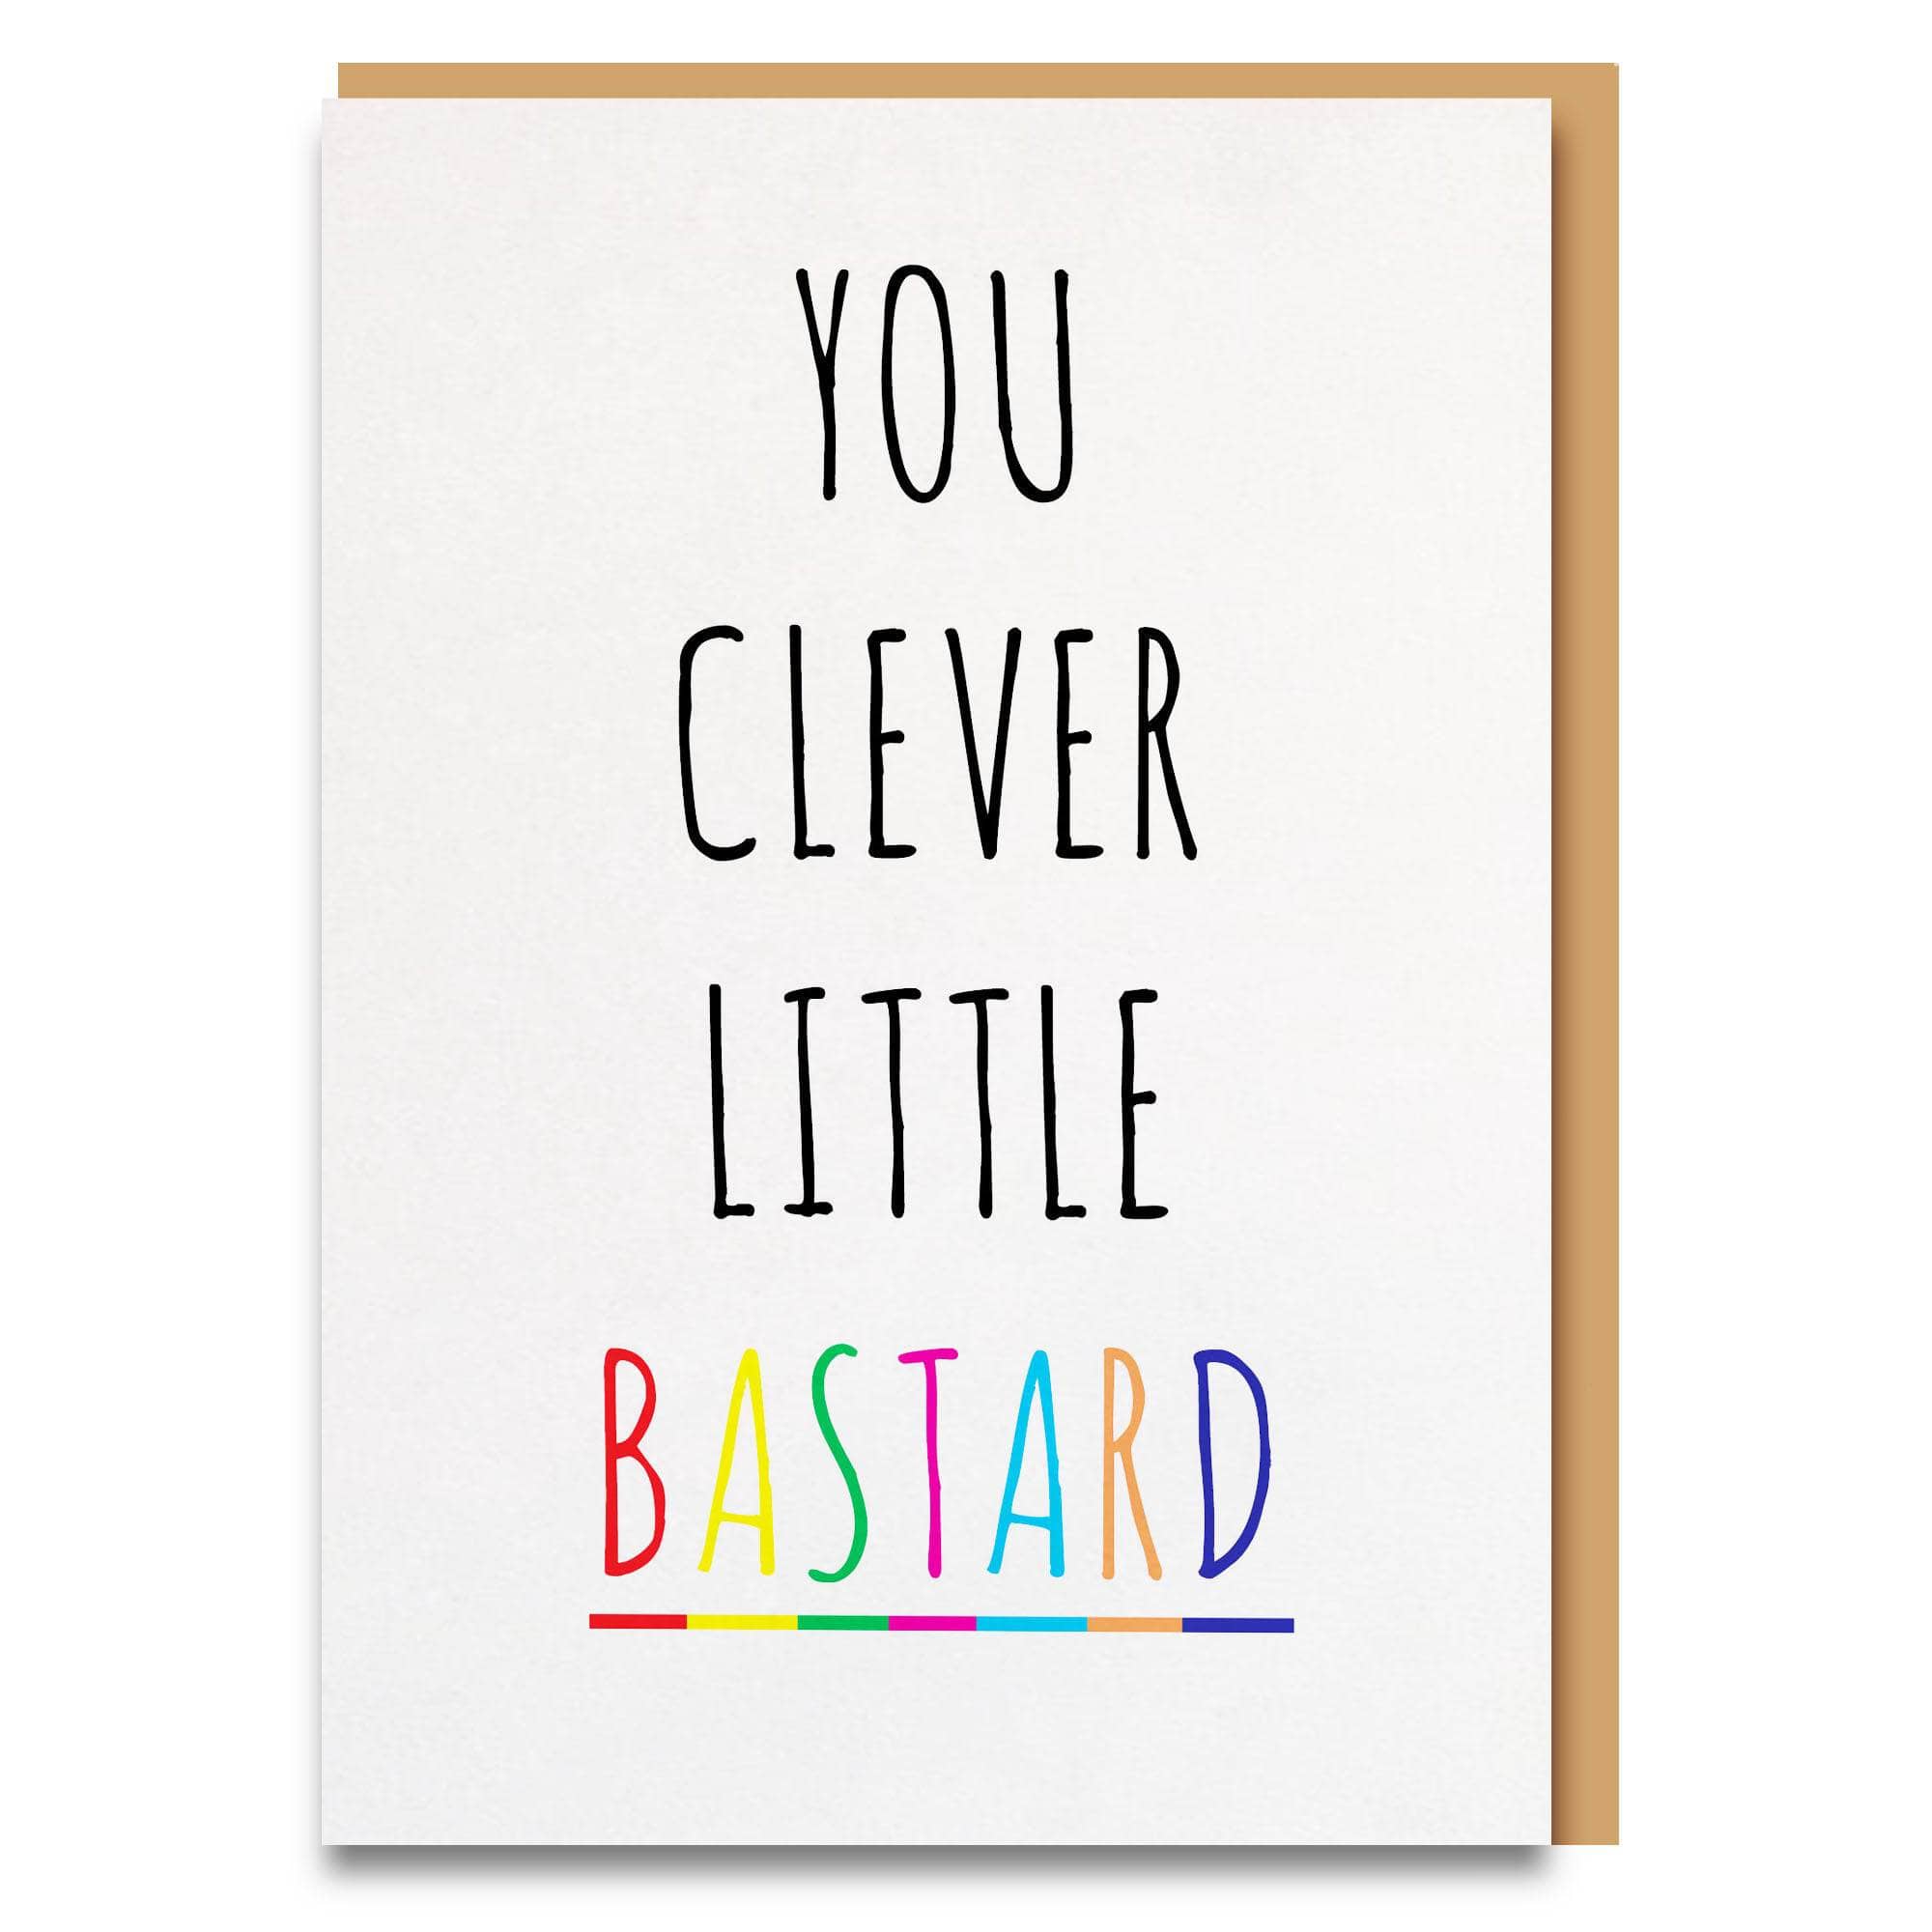 Funny and sweet clever little bastard congratulations card for new job, passed or exam or any time they've won at life! 